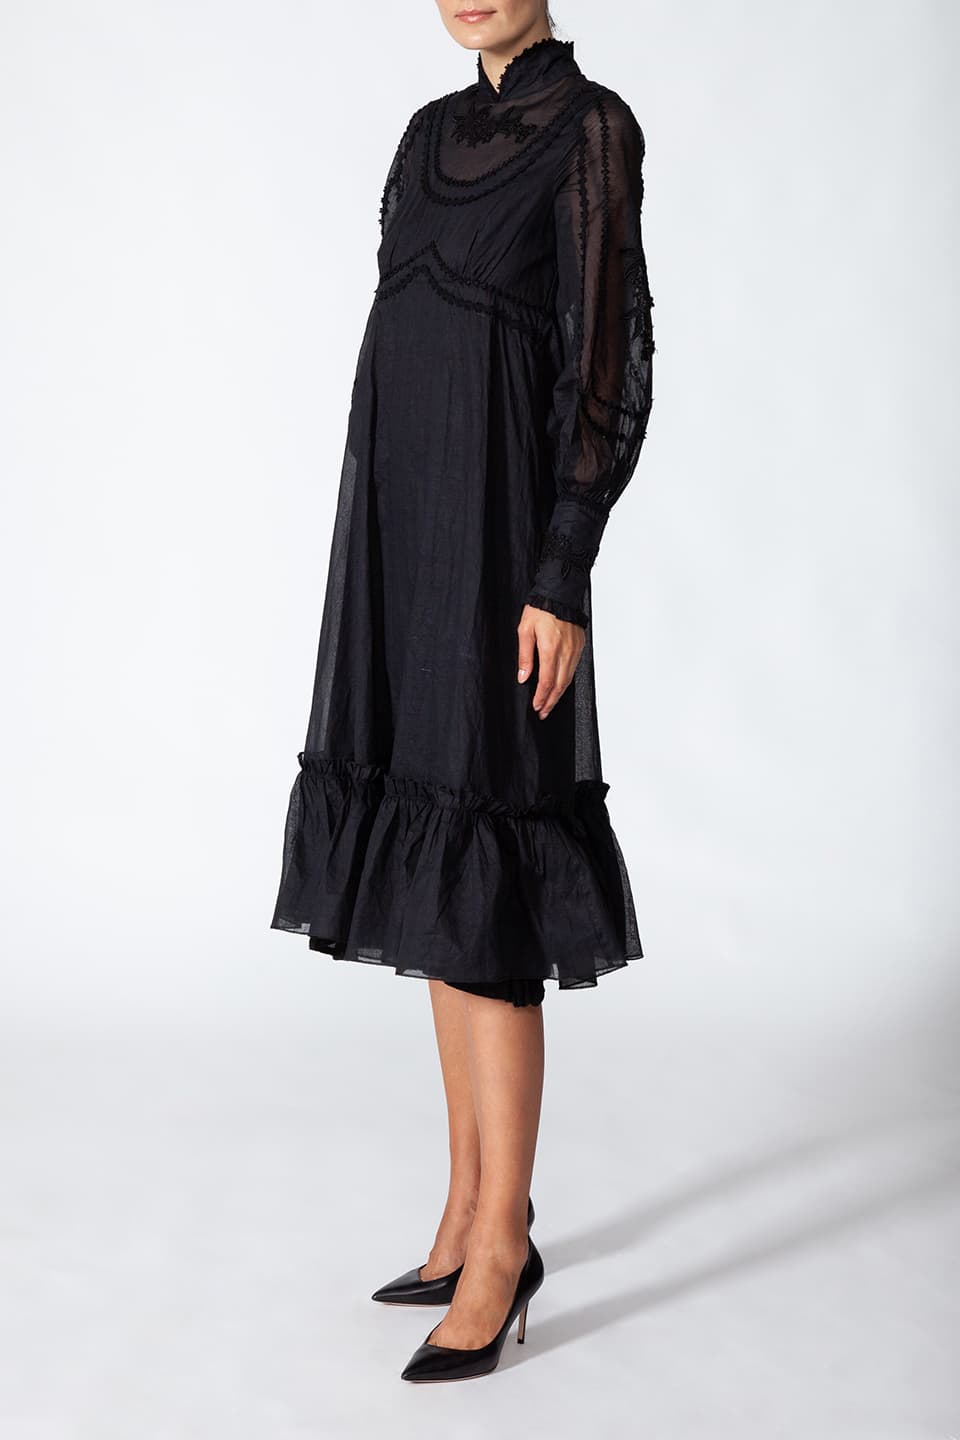 Thumbnail for Product gallery 3, Model wearing long black dress in cotton. with floral embroidery on the chest, in pose from right side. Dress is from Fashion Designer Manoush collection.